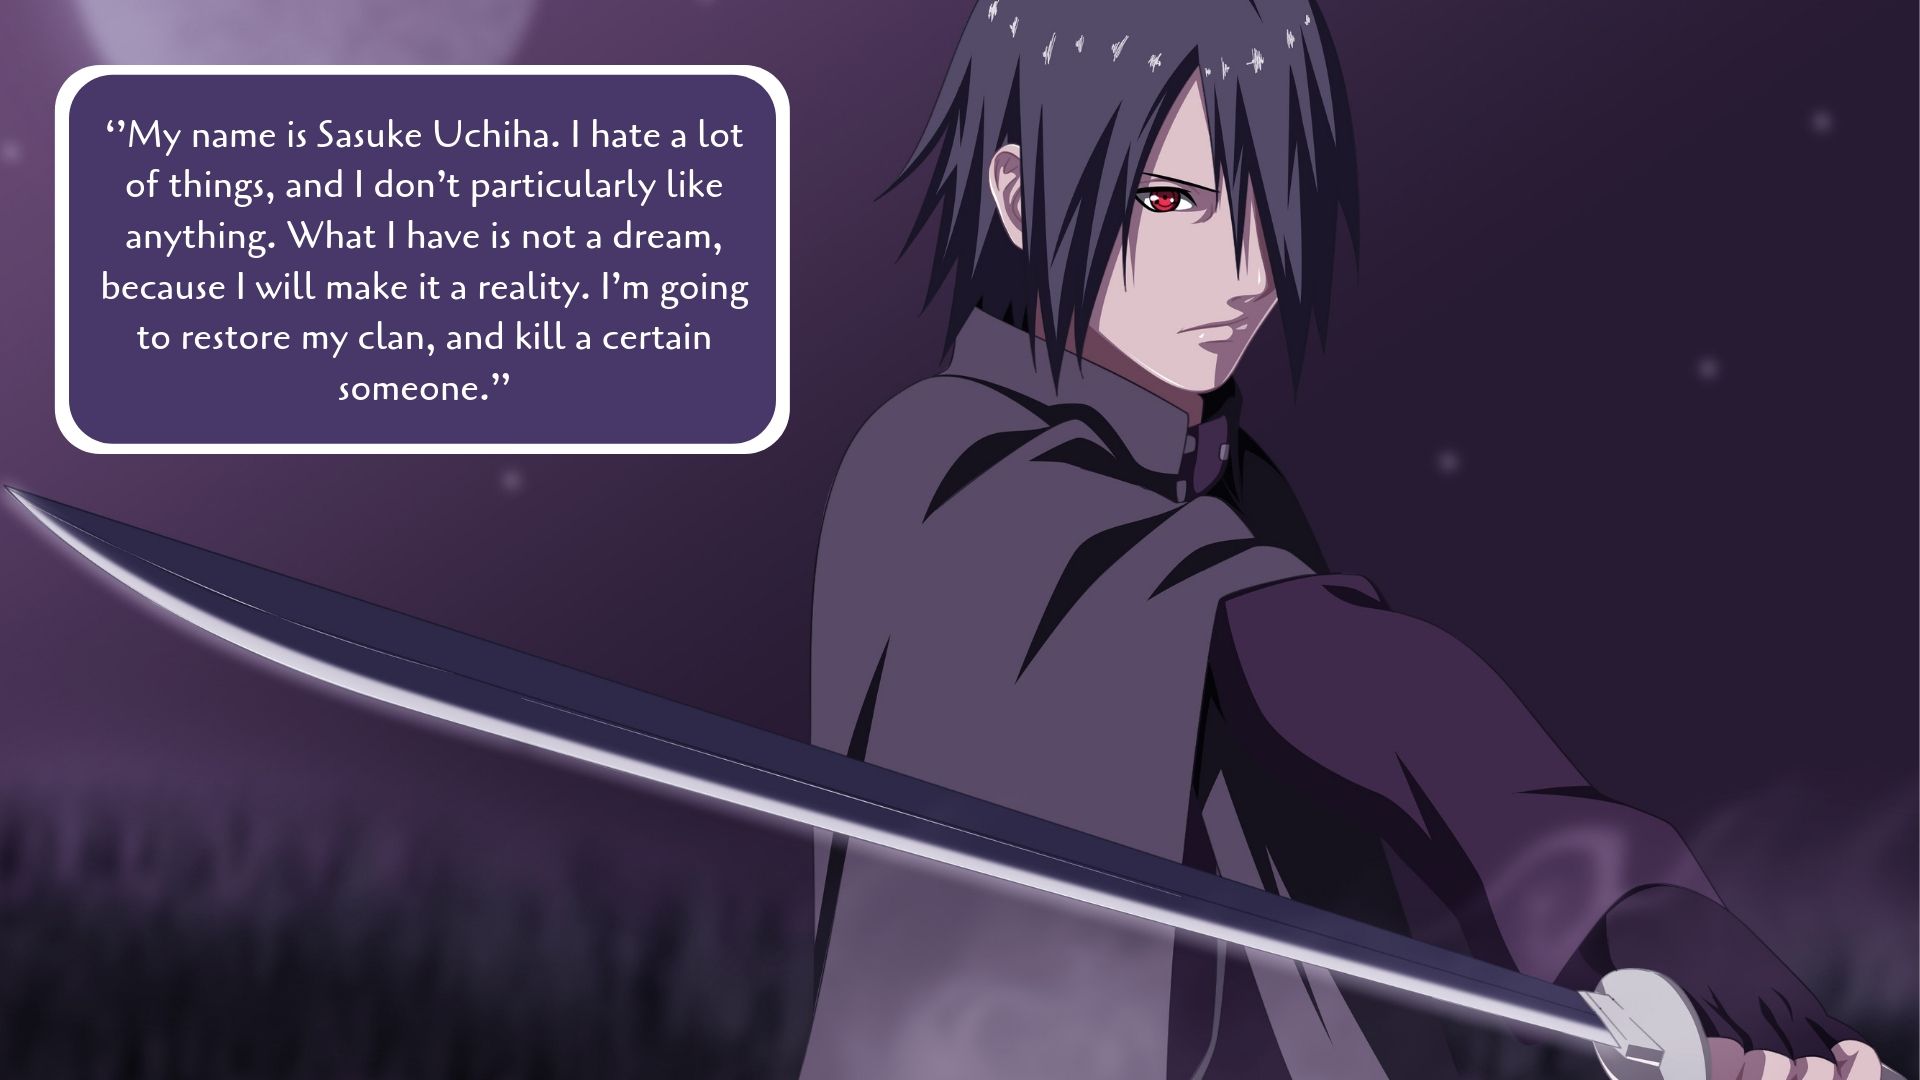 Best Sasuke Quotes from the anime Naruto Foots World